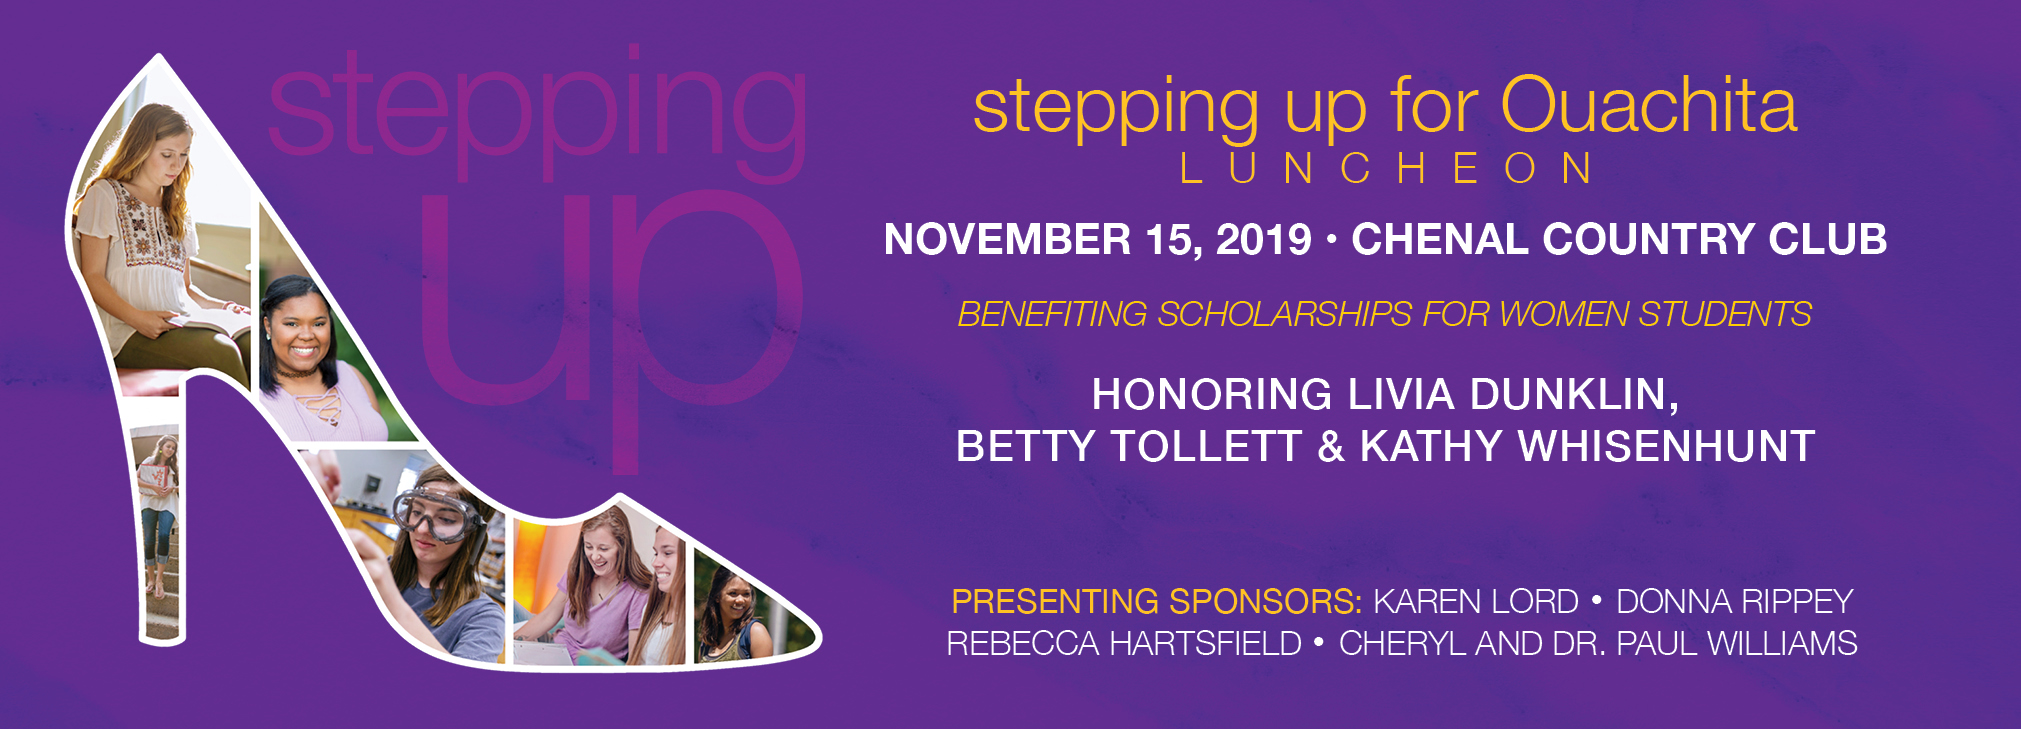  Stepping Up for Ouachita 10th anniversary luncheon to honor three Ouachita mothers: Livia Dunklin, Betty Tollett and Kathy Whisenhunt.